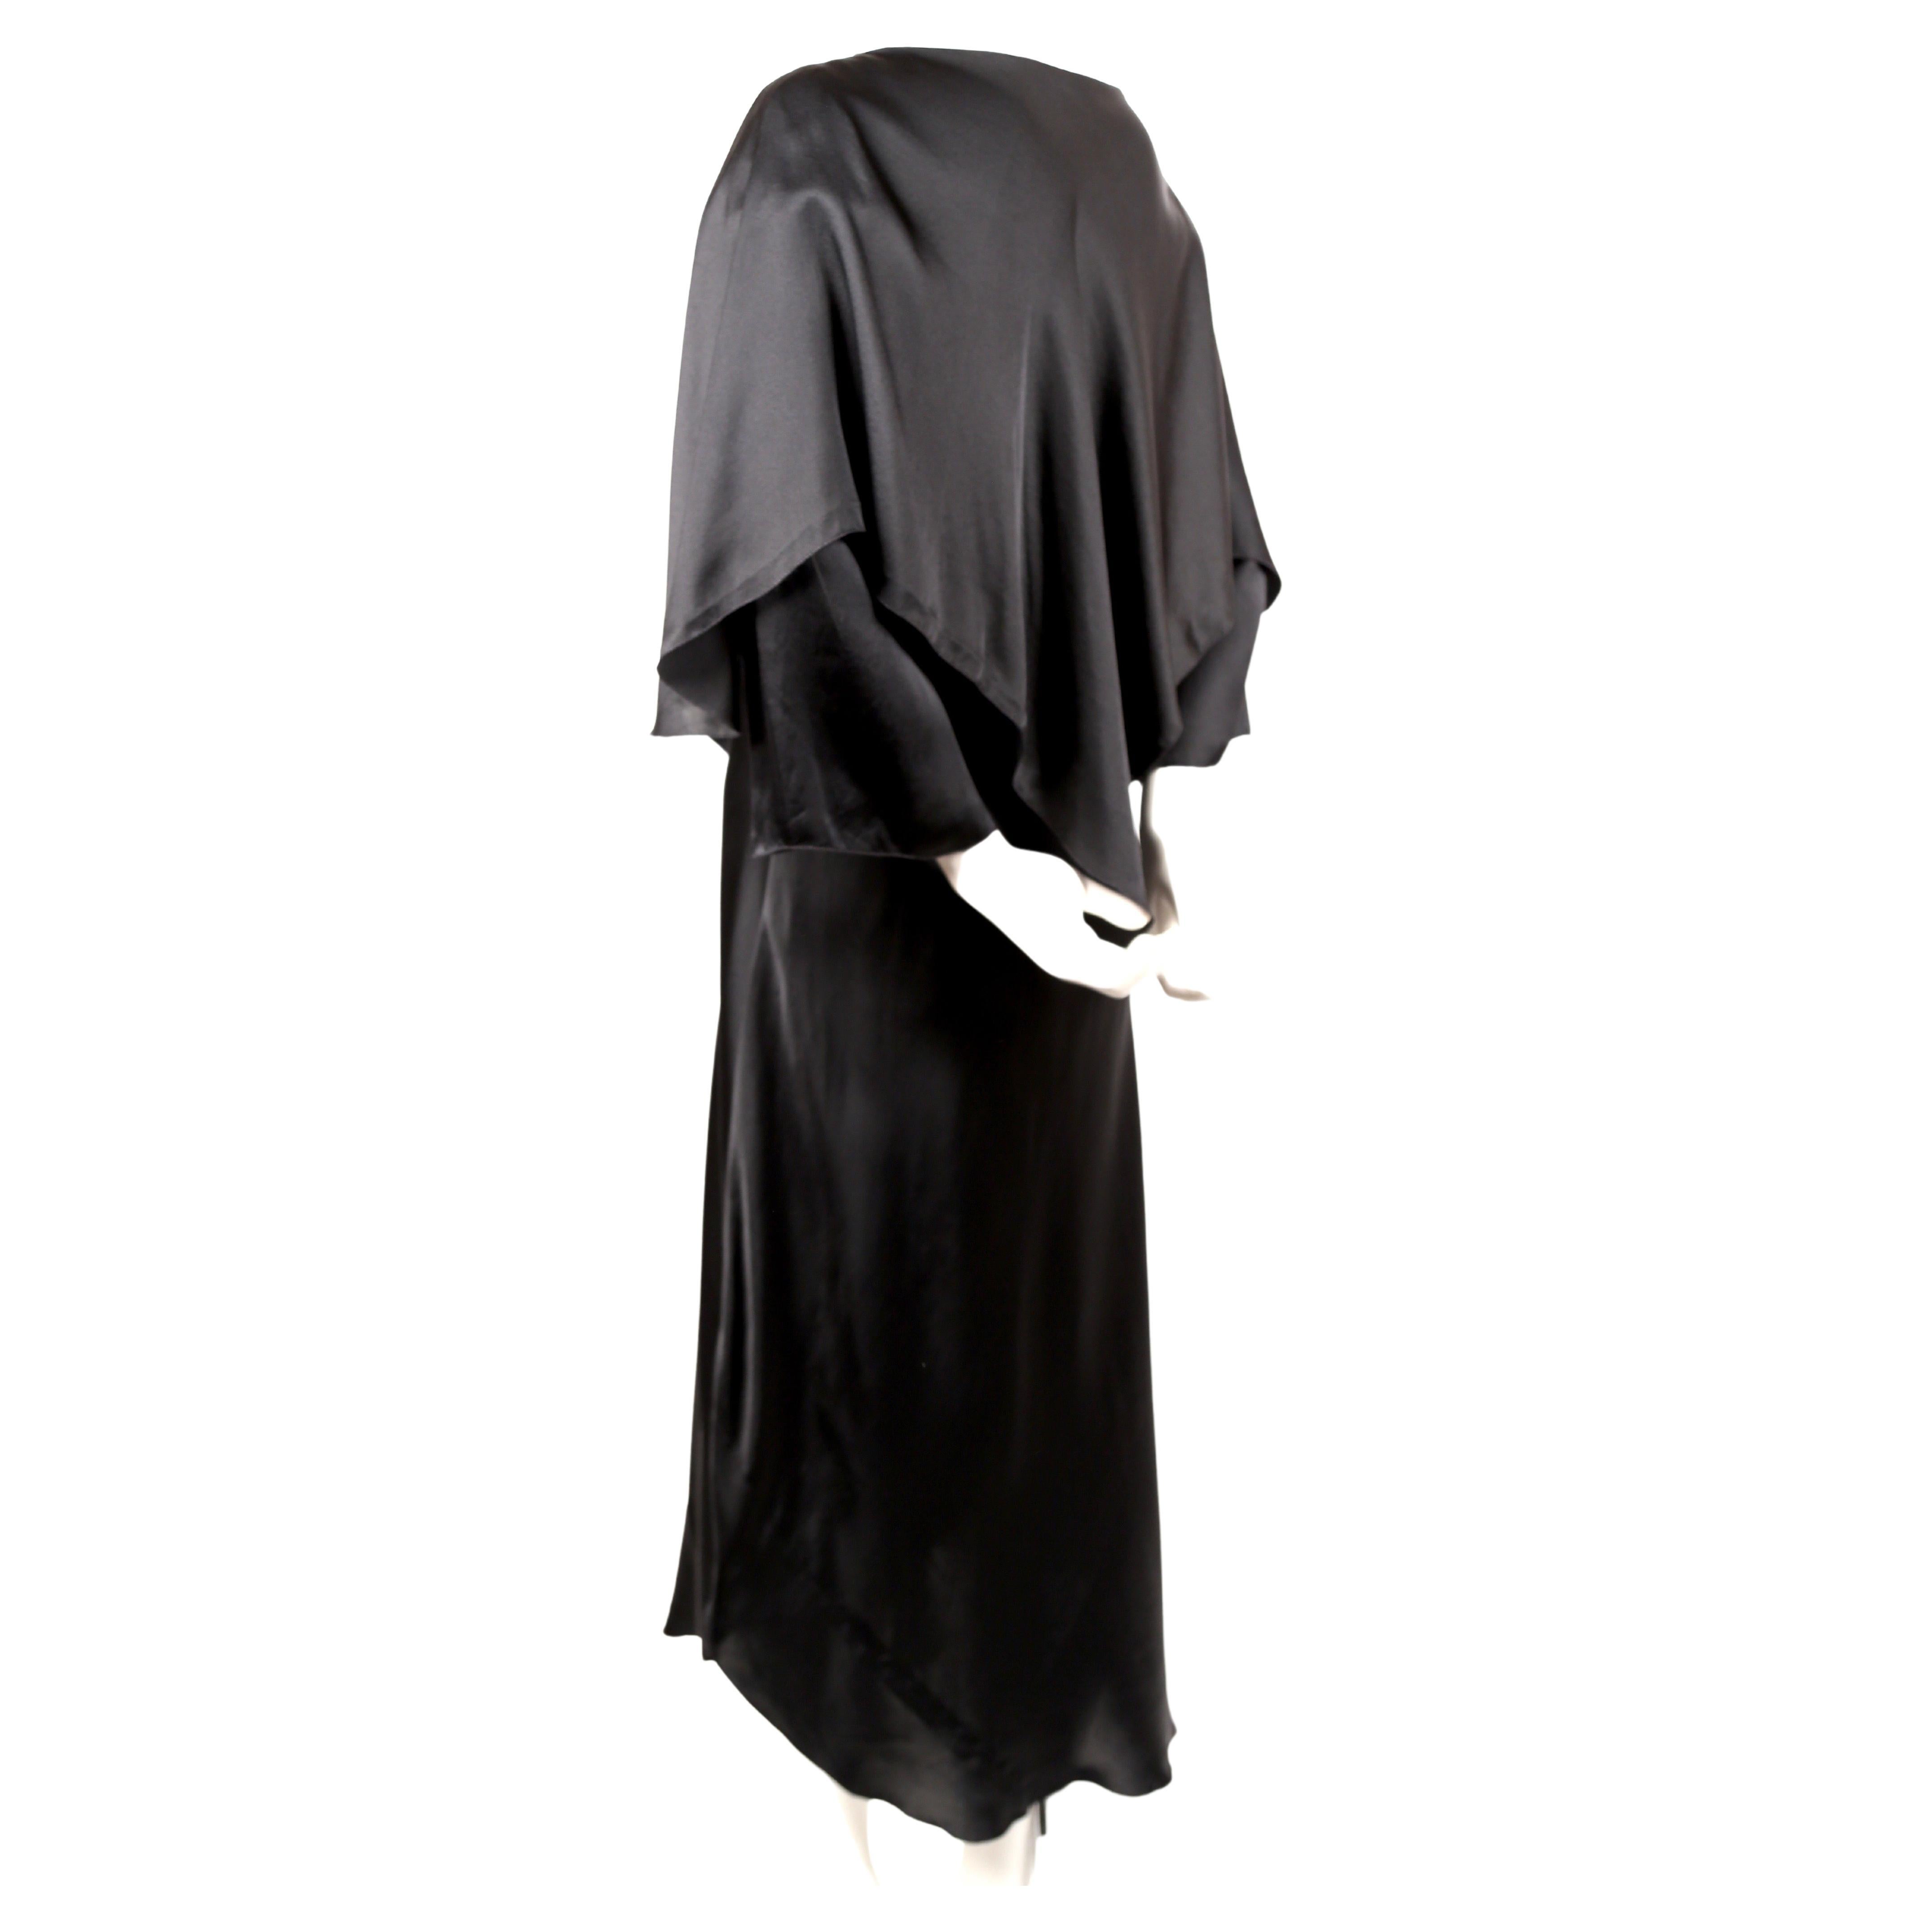 Black, bias-cut silk dress with uneven hemline and cape designed by Sonia Rykiel dating to the 1970's. No size is indicated however this is best suited for a US 2-4. Approximate measurements: 32